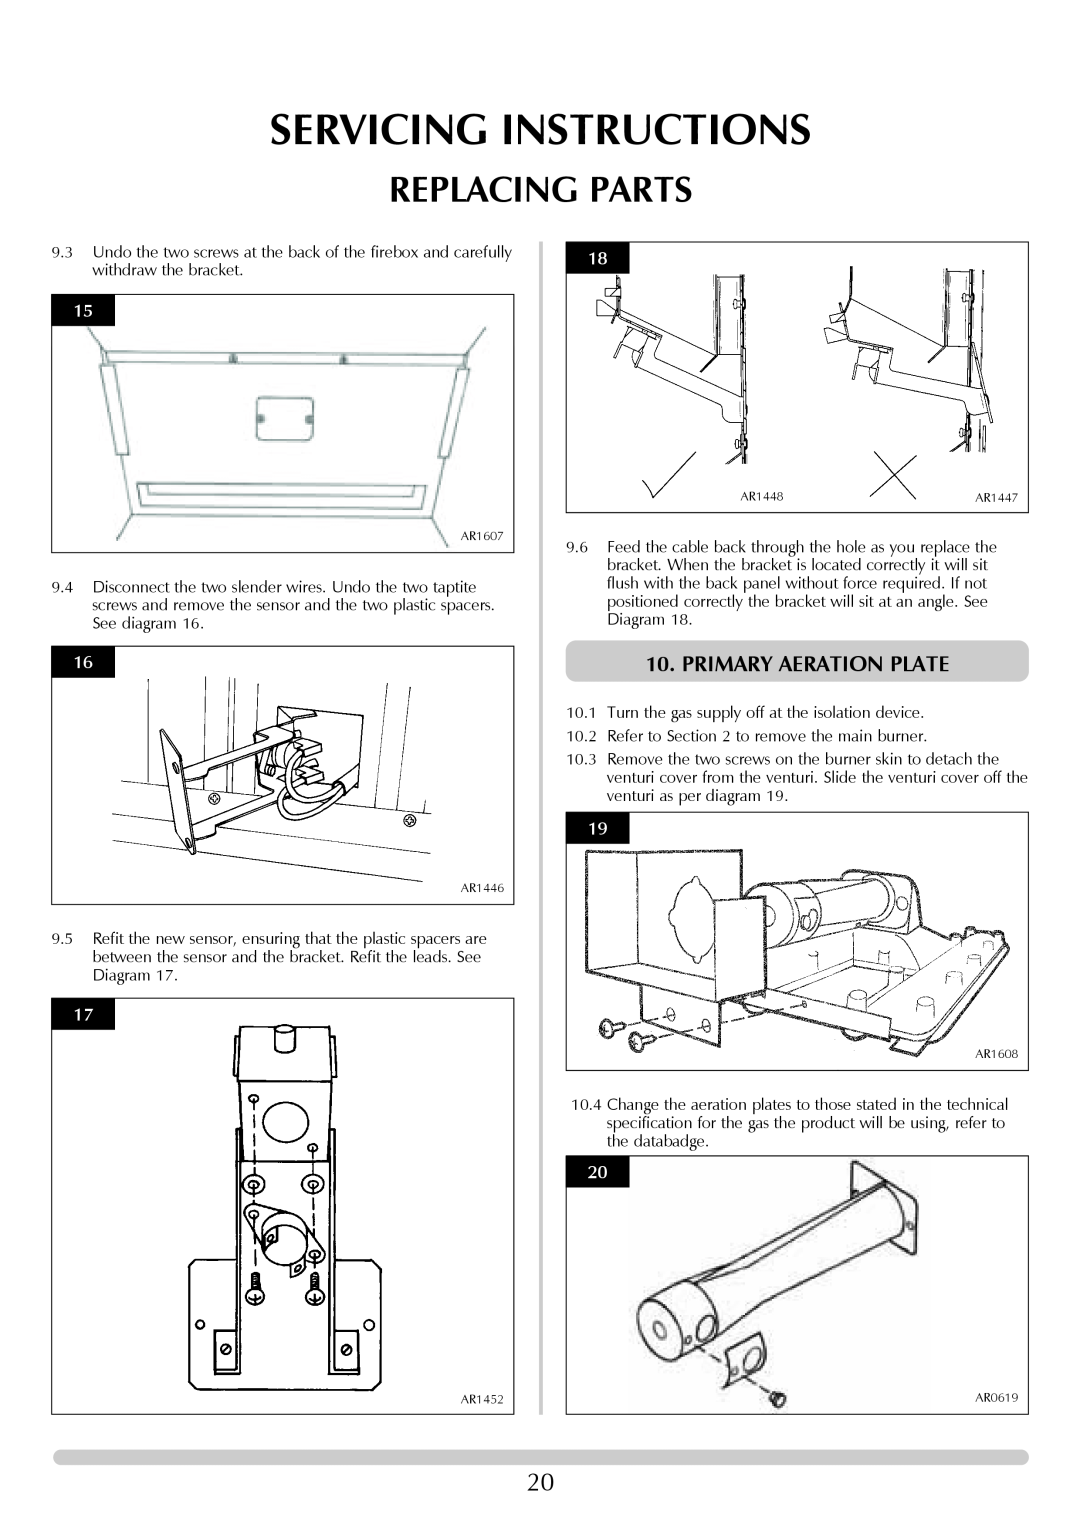 Stovax 705088 manual Servicing Instructions, Replacing Parts, Primary Aeration Plate 